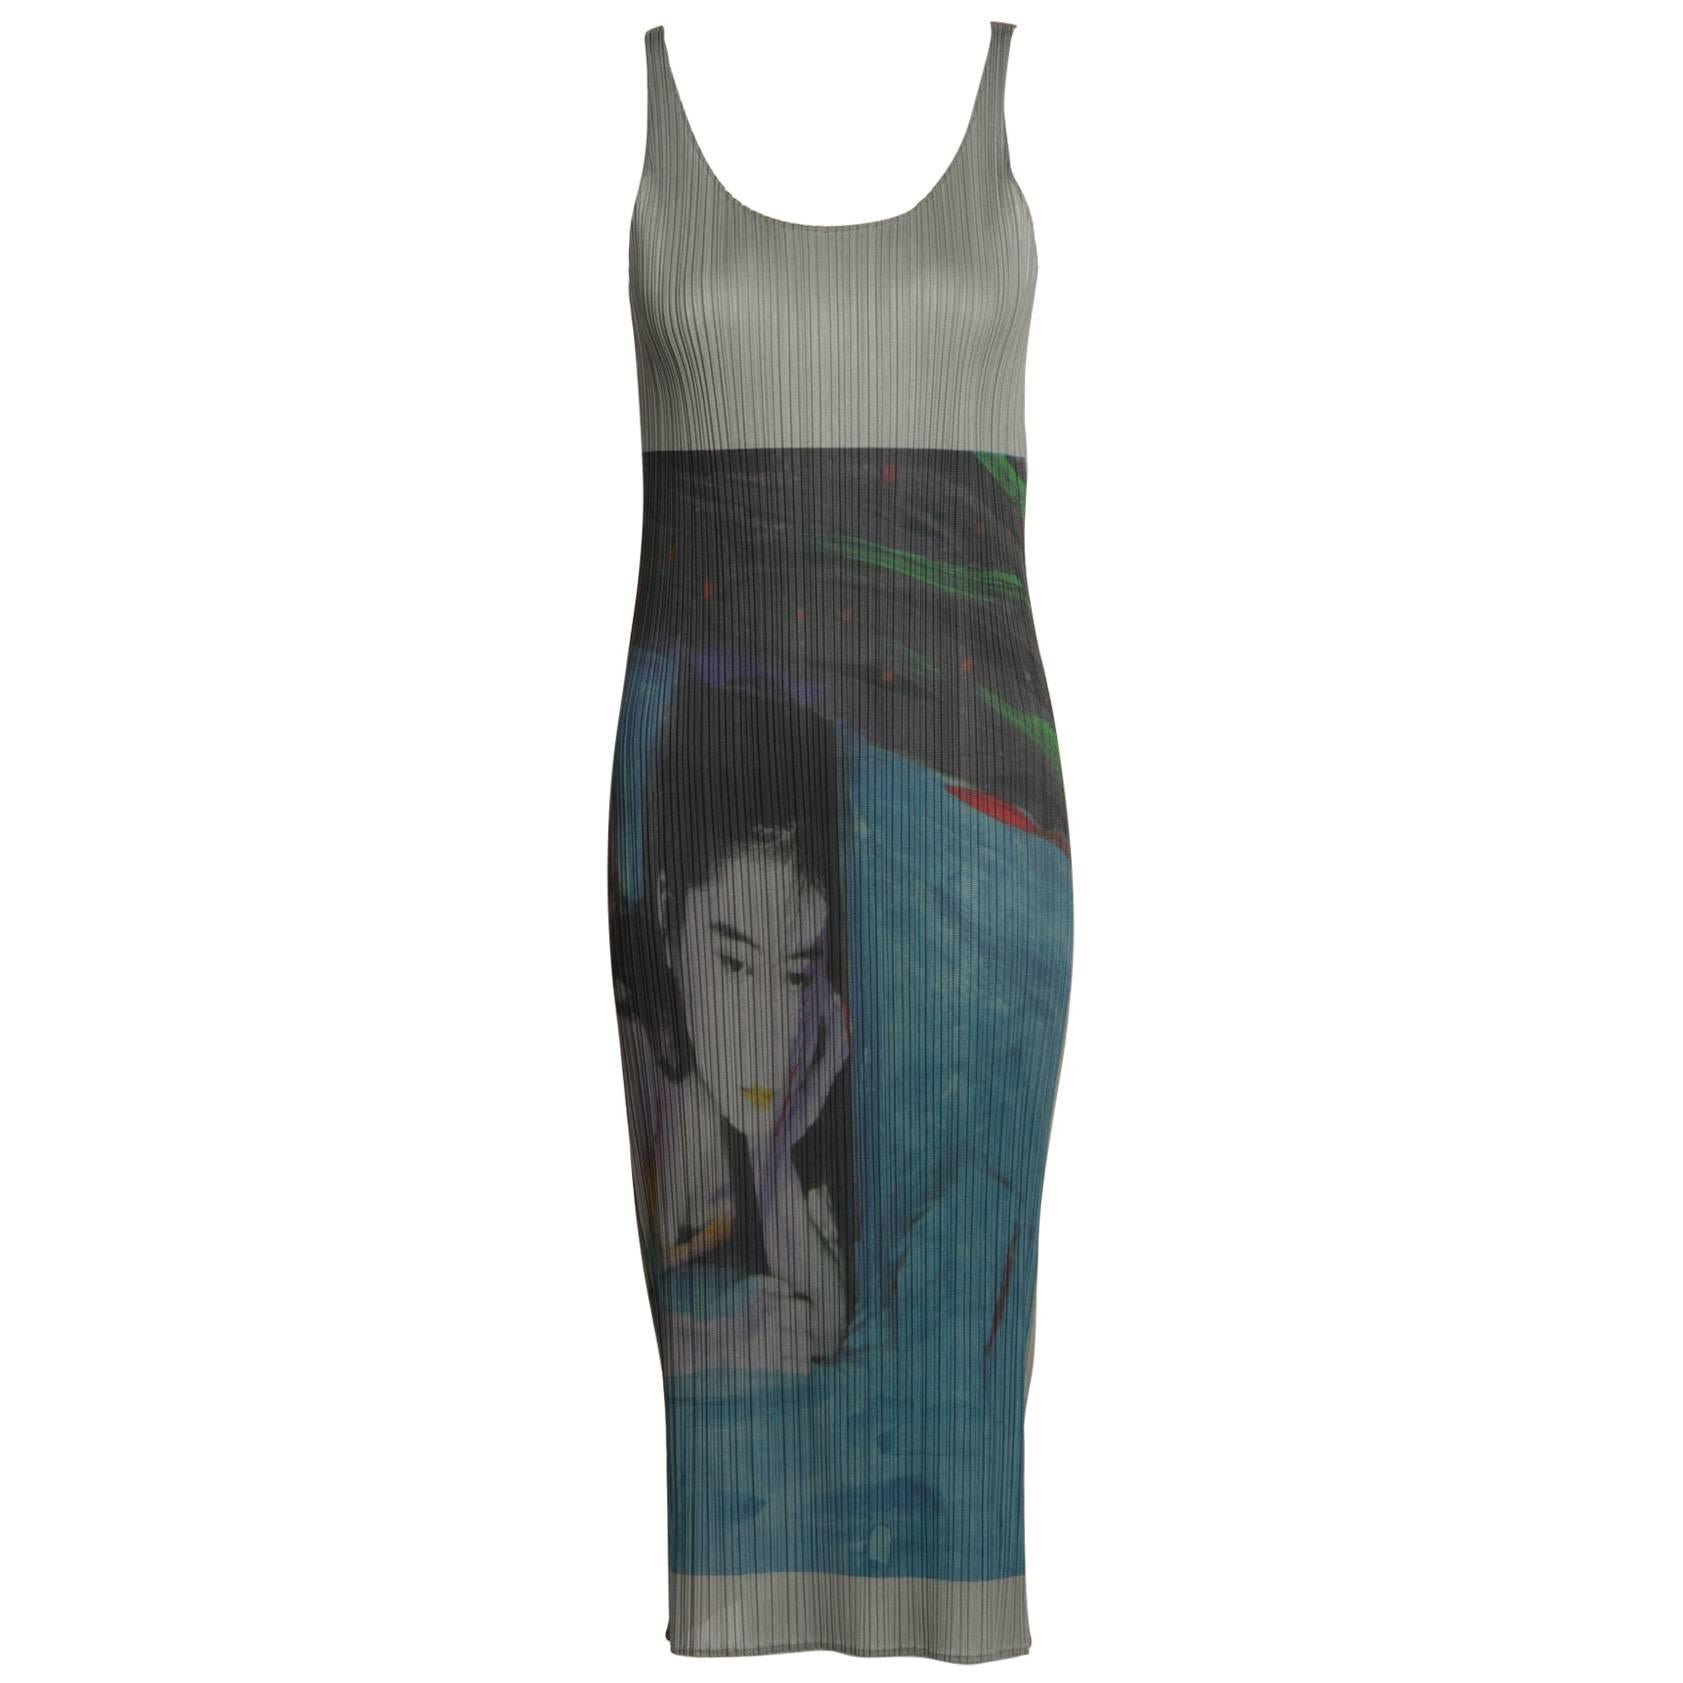 Issey Miyake Guest Artist Series No 2 Pleated Dress, 1997 